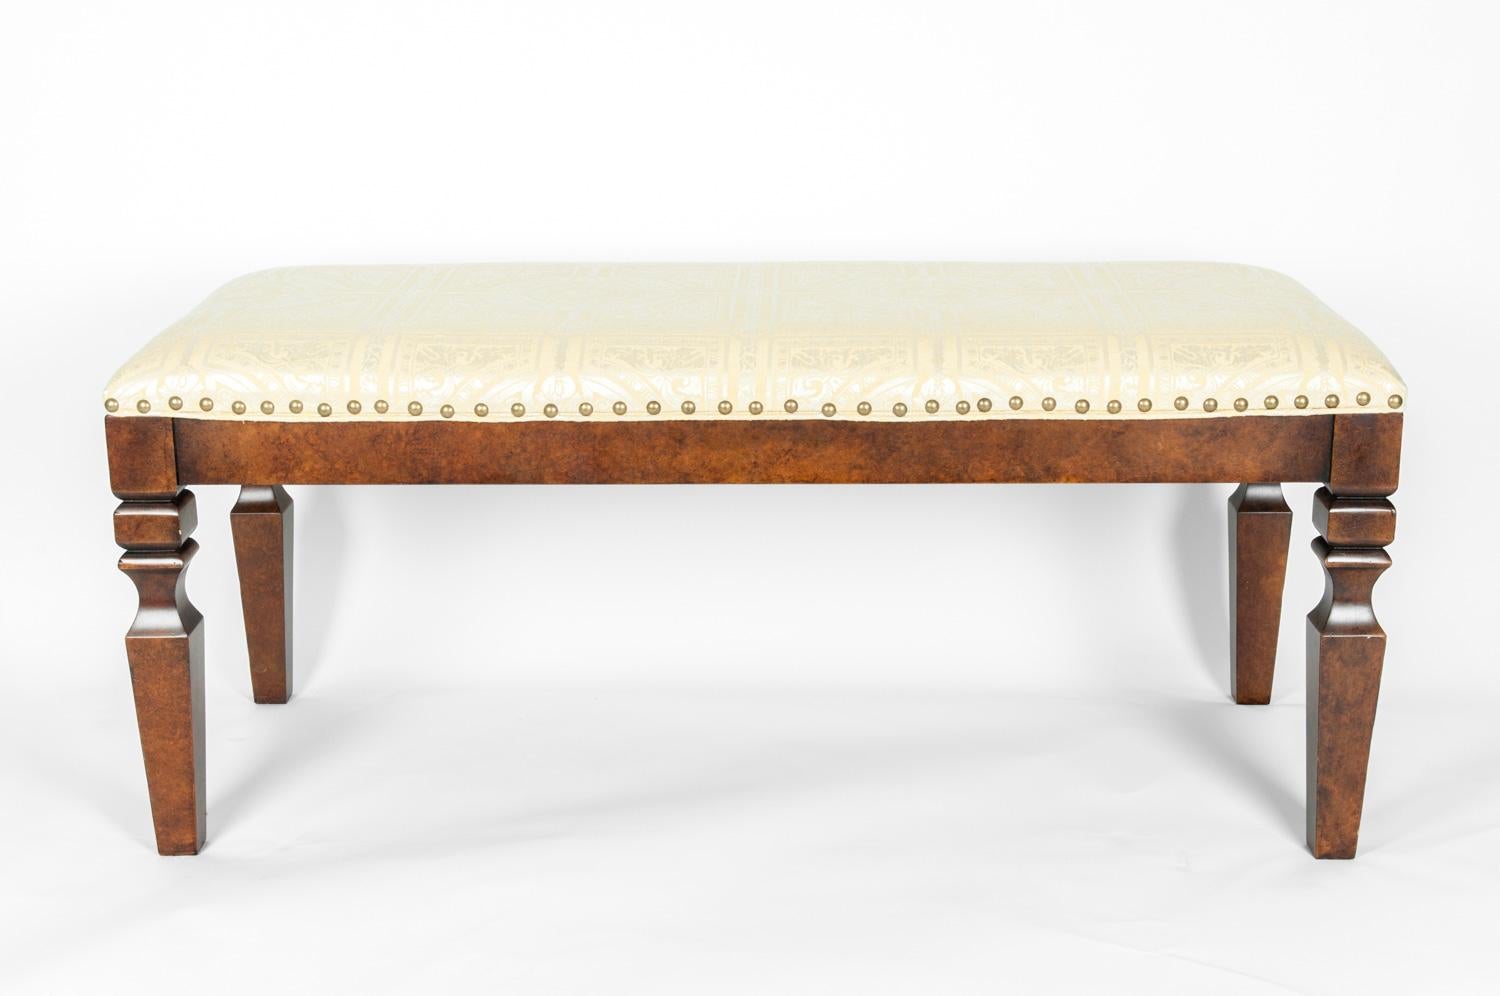 Mahogany wood framed bench. The bench is in excellent condition. The upholstery is immaculate. The bench measure about 48 inches length x 20 inches width x 19 inches high.